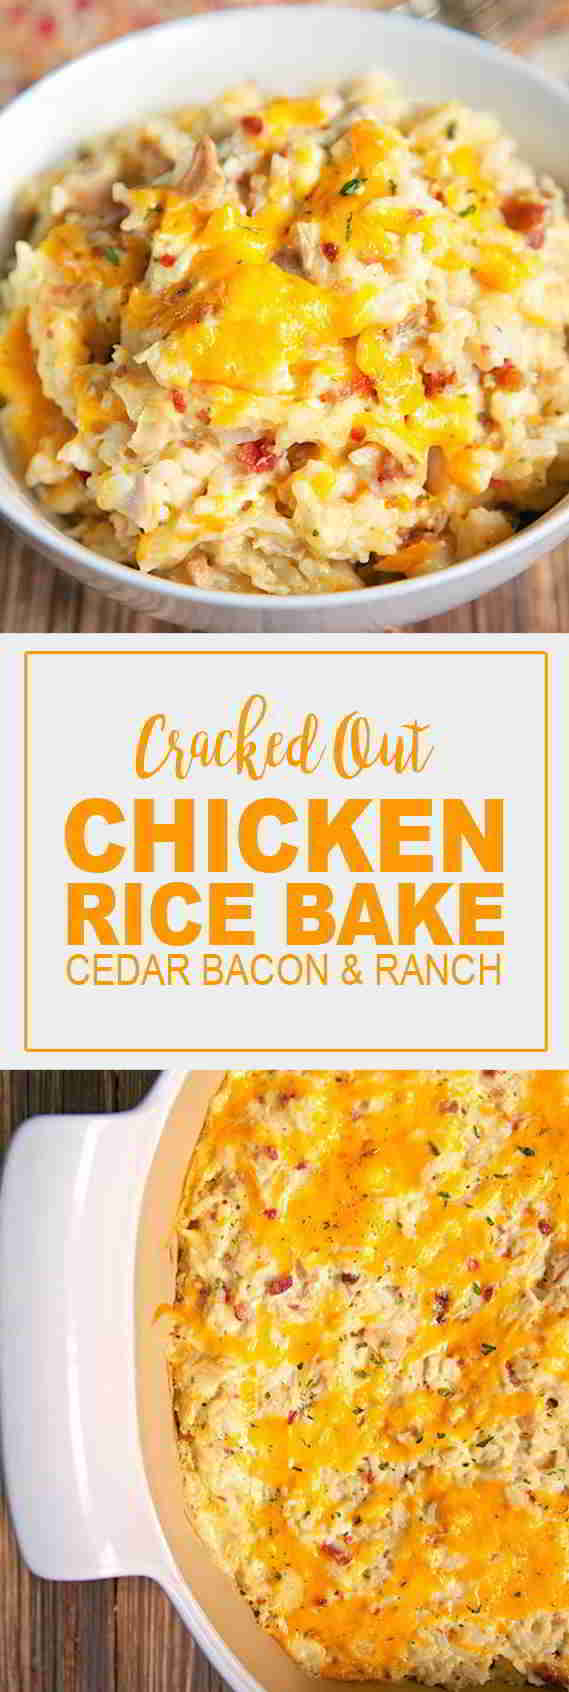 Cracked-Out-Chicken-and-Rice-Bake-Recipe